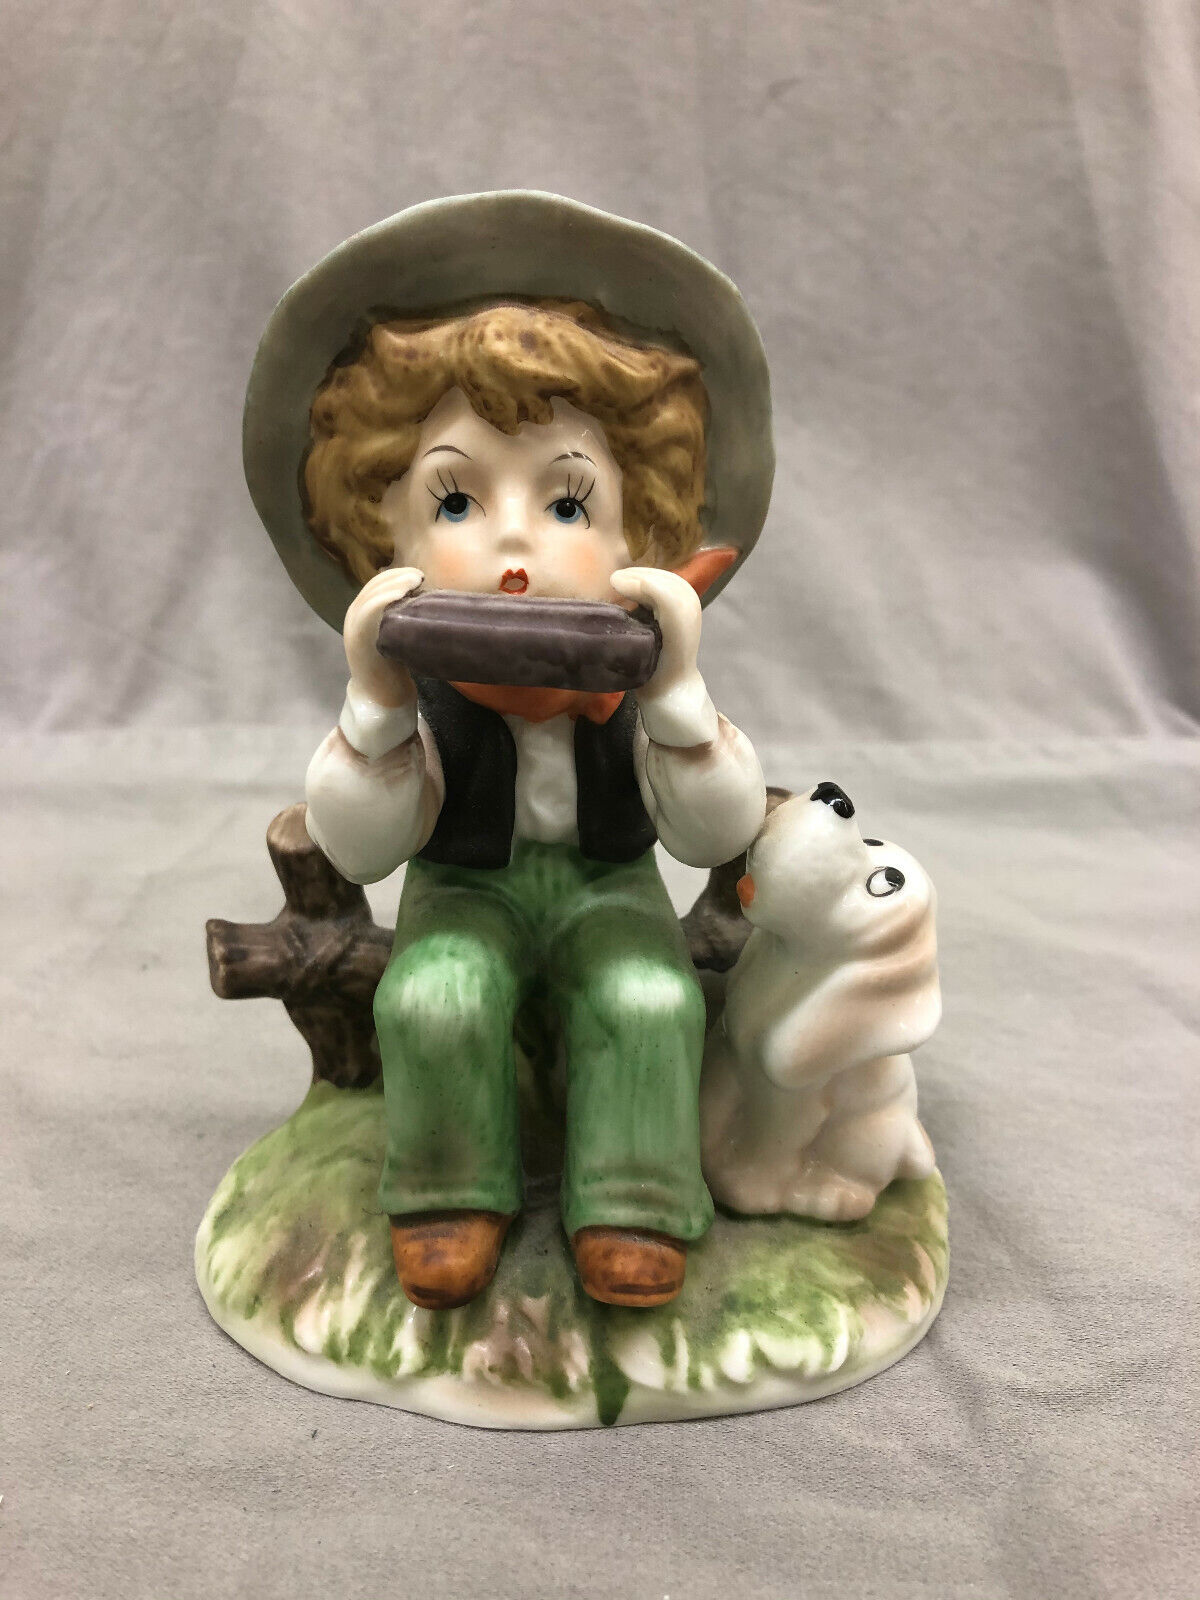 Vintage Hand Painted Ceramic Boy Playing Harmonica with his Dog